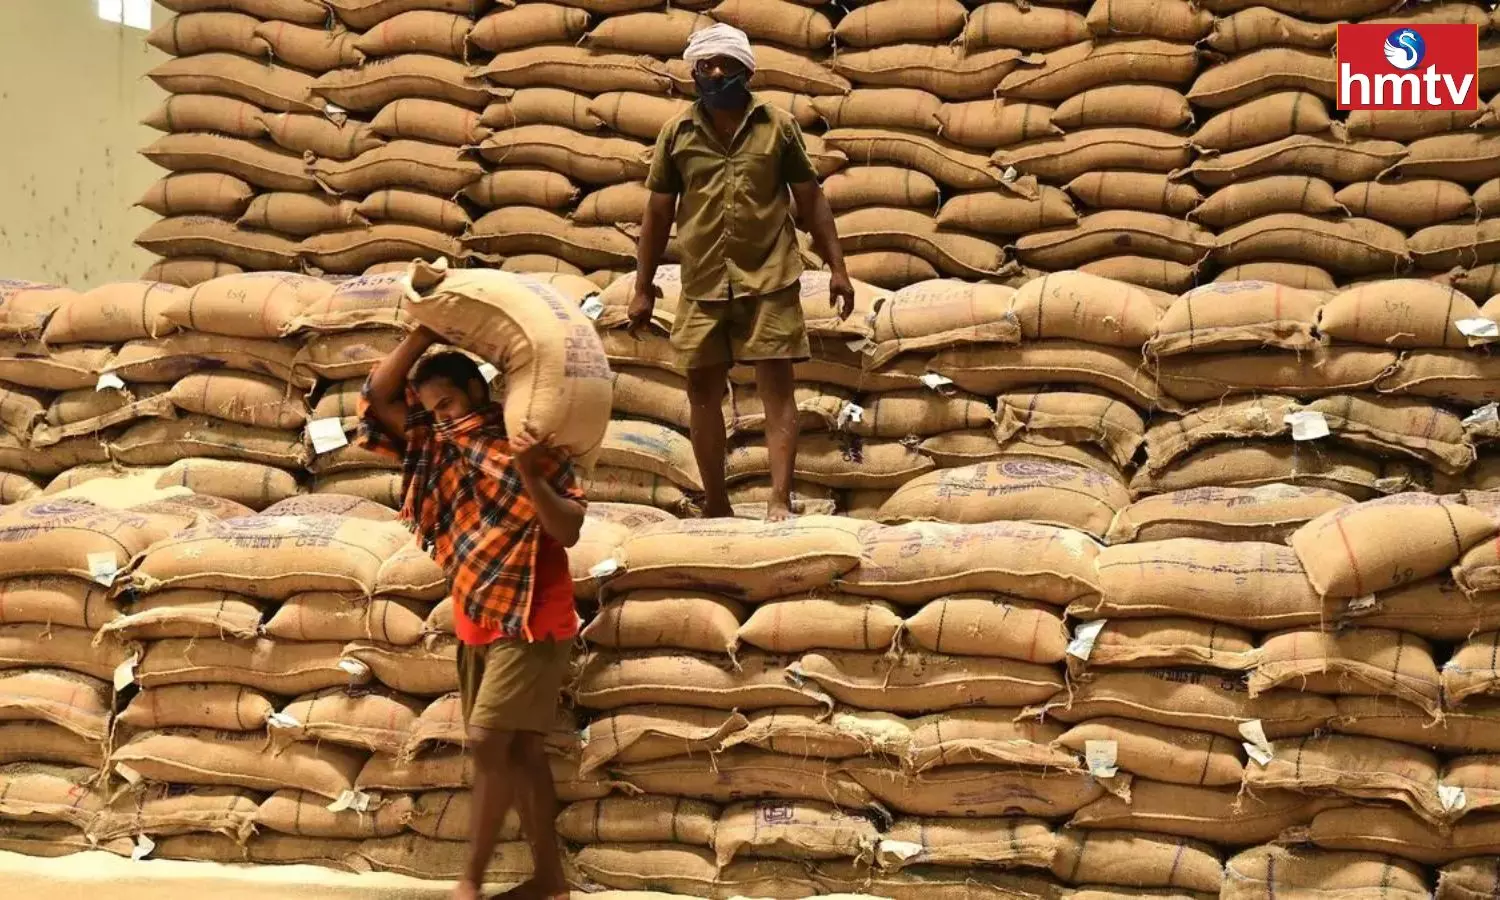 Govt To Sell ‘Bharat Rice’ At ₹29/Kg In Retail Outlets From Feb 9